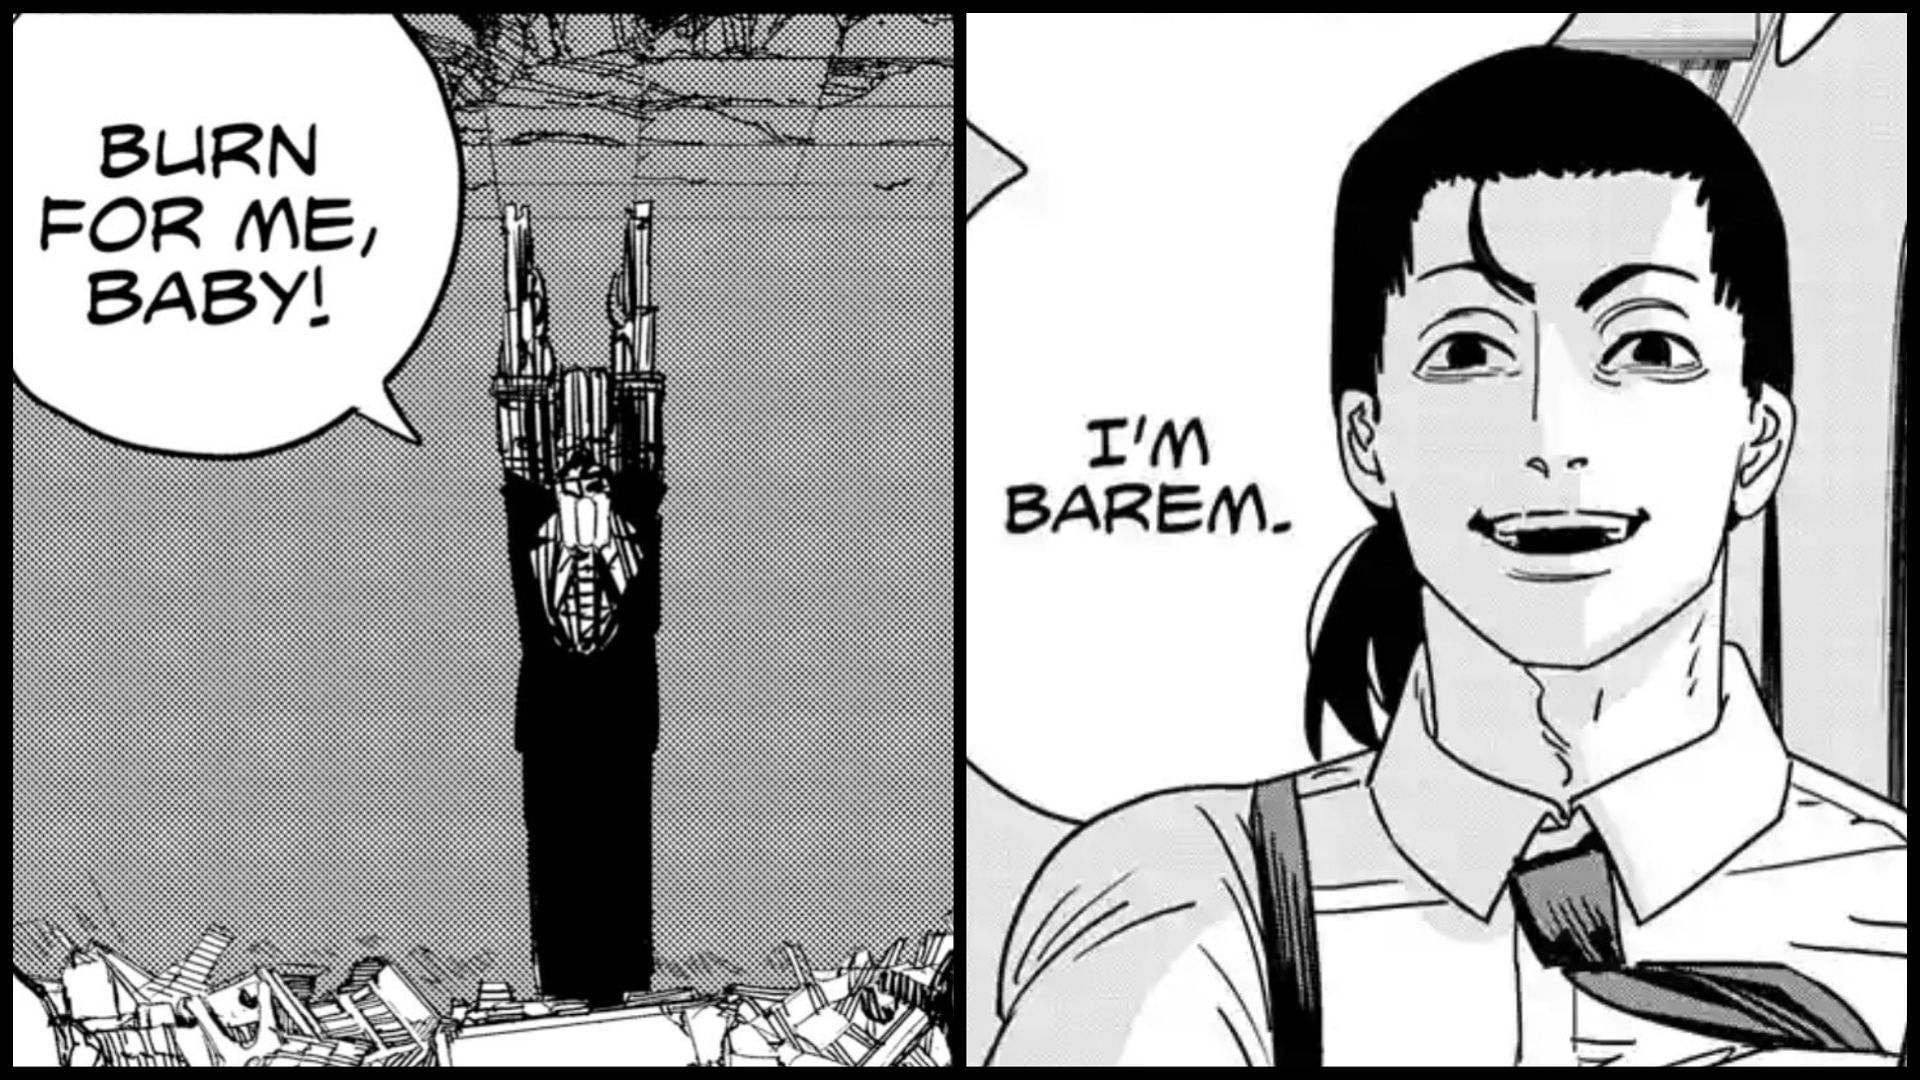 Barem Bridge&#039;s previous affiliations with the Chainsaw Man Church and Famine Devil Fami make his reappearance unlikely in this context (Images via Shueisha)